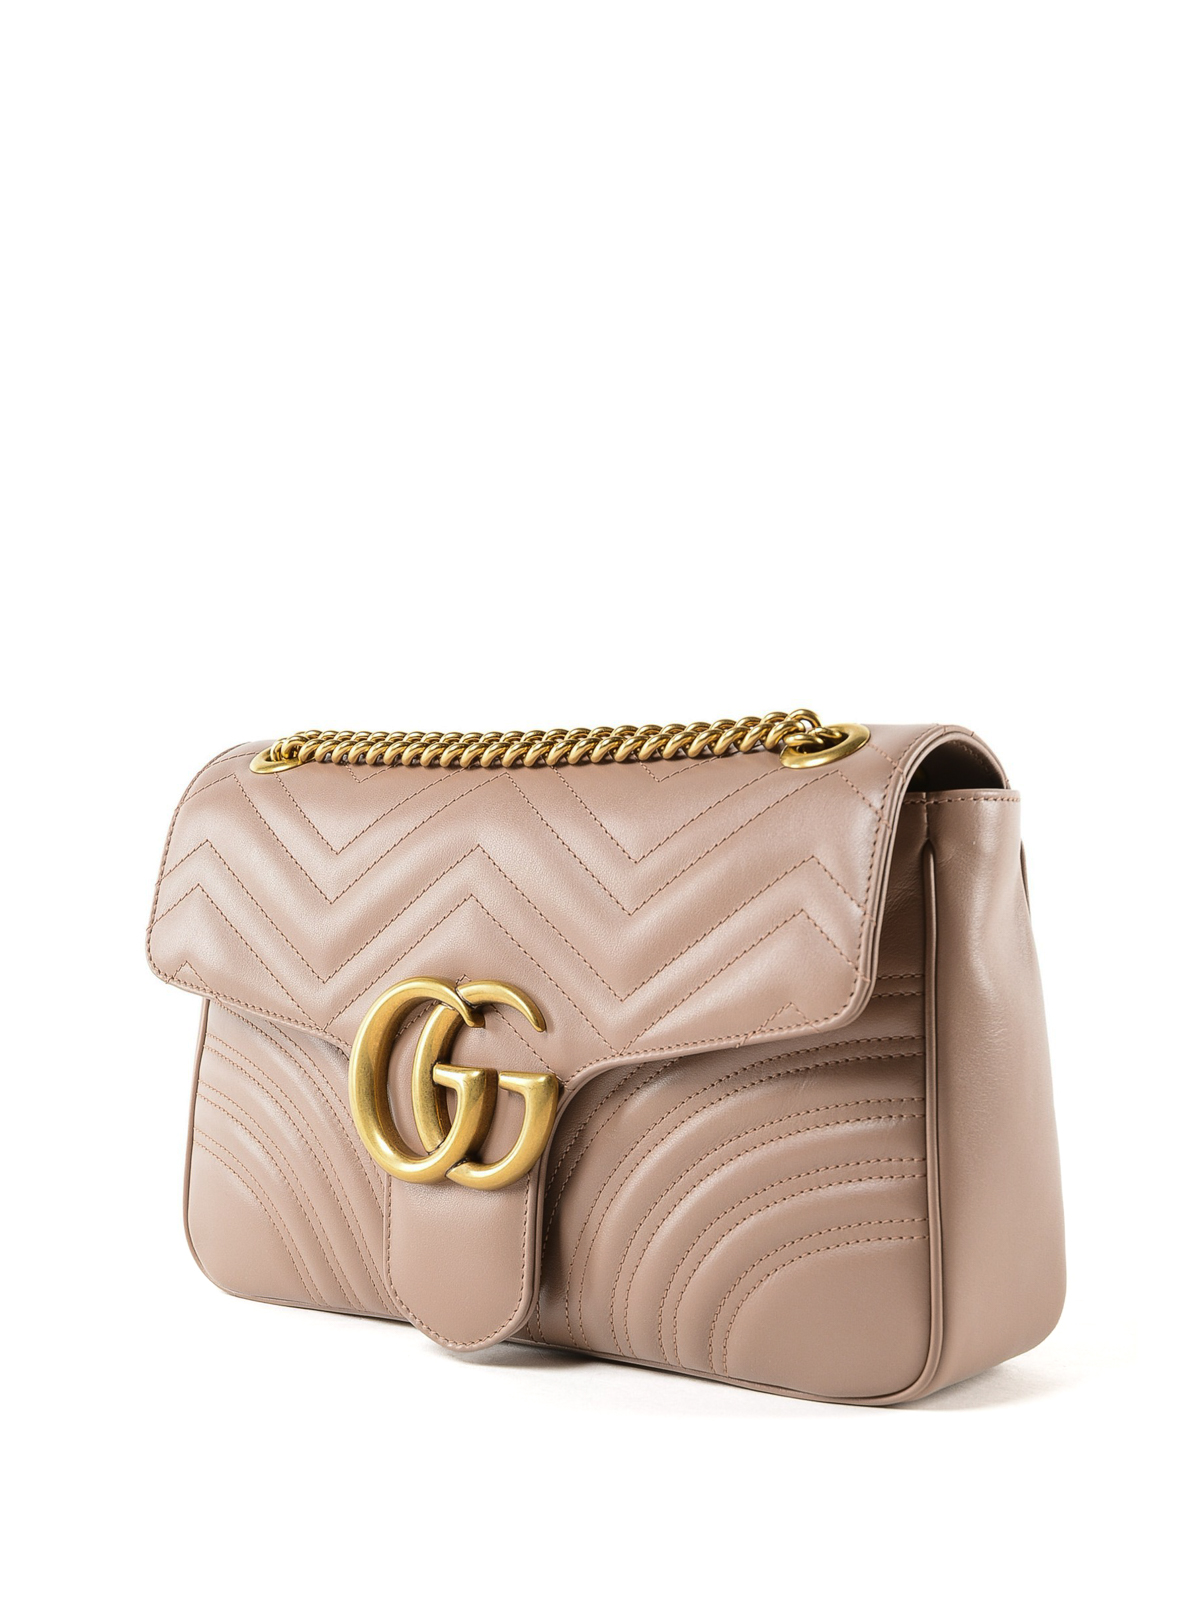 GG Marmont Medium Leather Wallet in Pink - Gucci